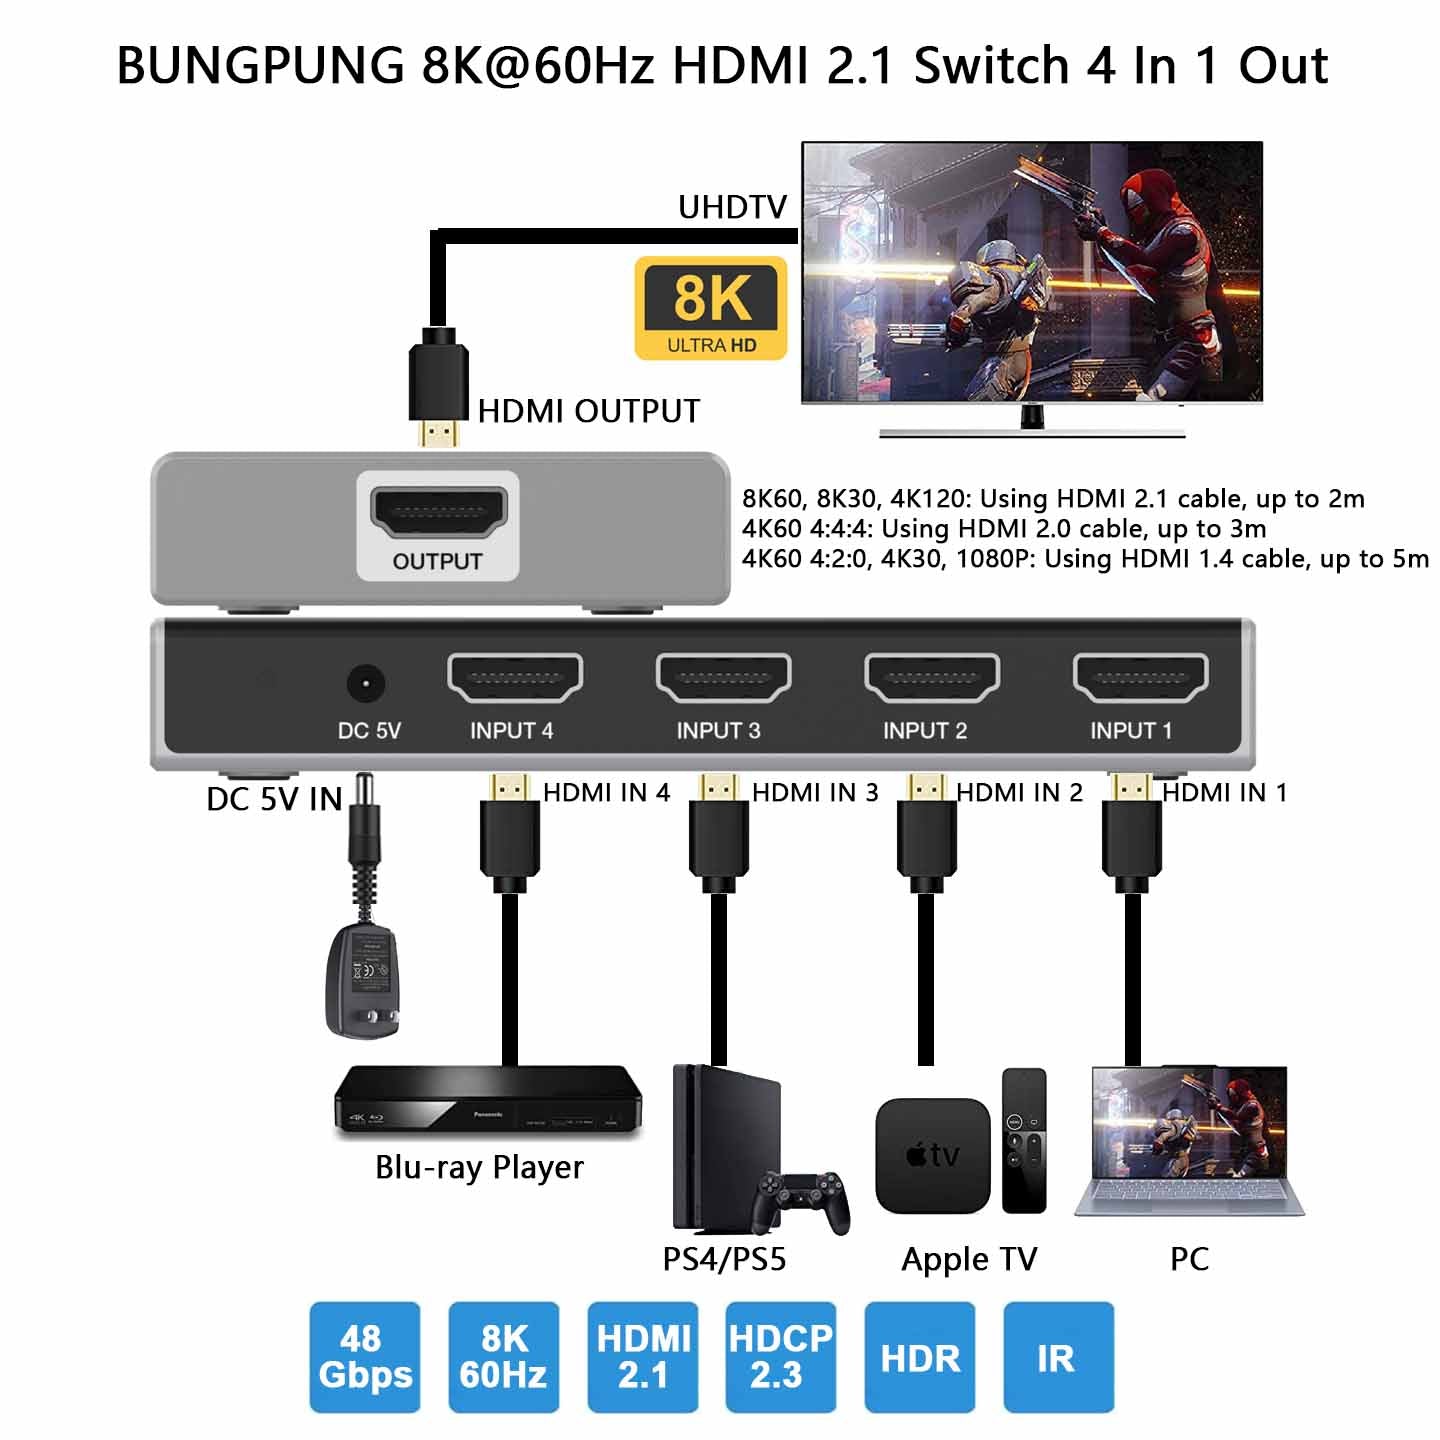 8K HDMI Switch 4 in 1 out connection